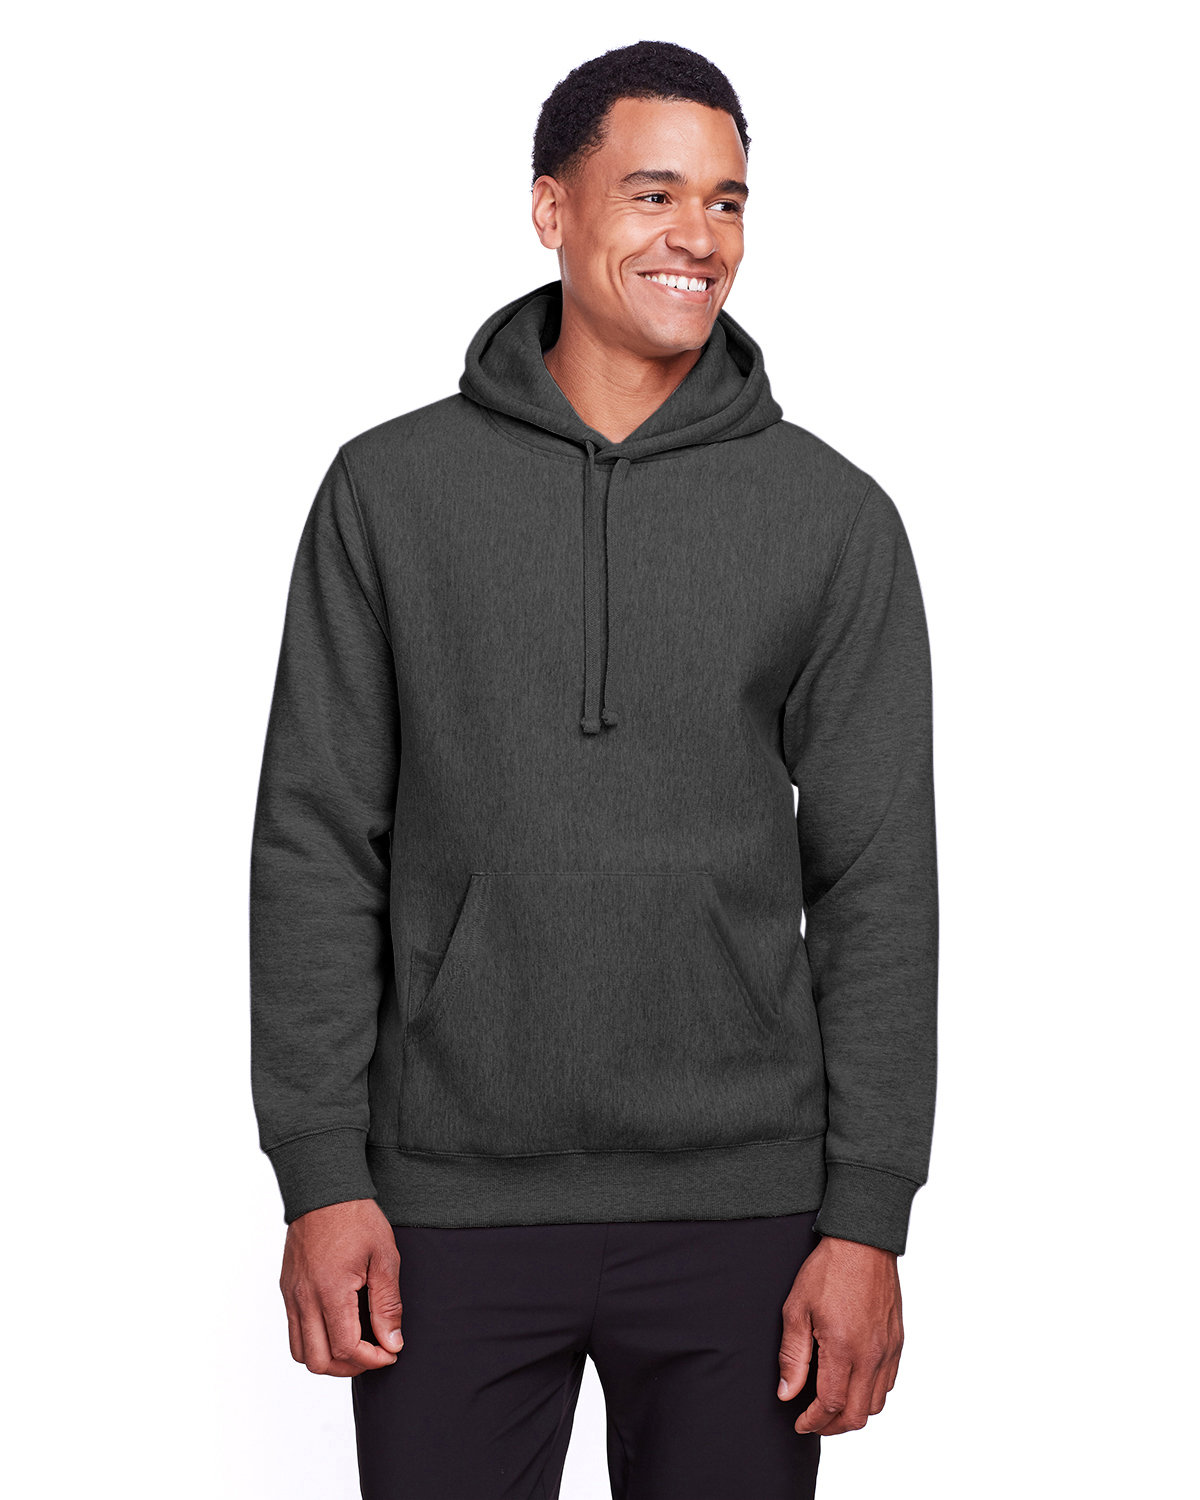 GT Insulated Peformance Hoodie XXL / Green Charcoal